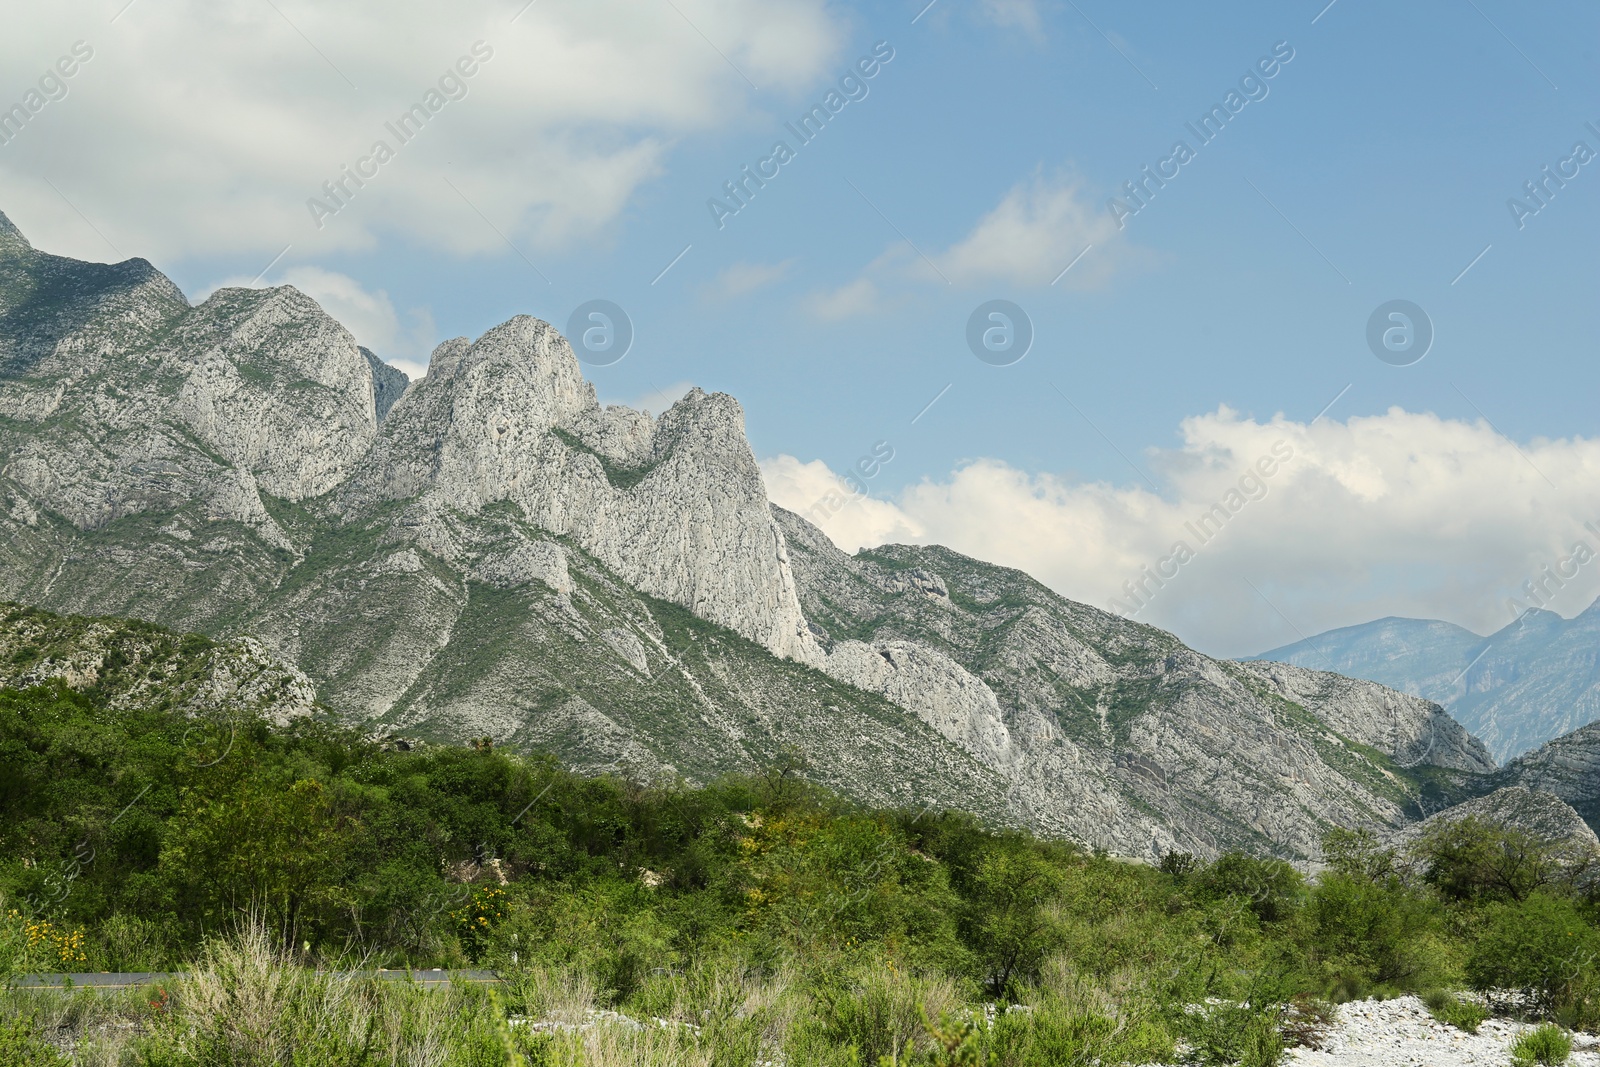 Photo of Picturesque view of beautiful mountains and plants under cloudy sky